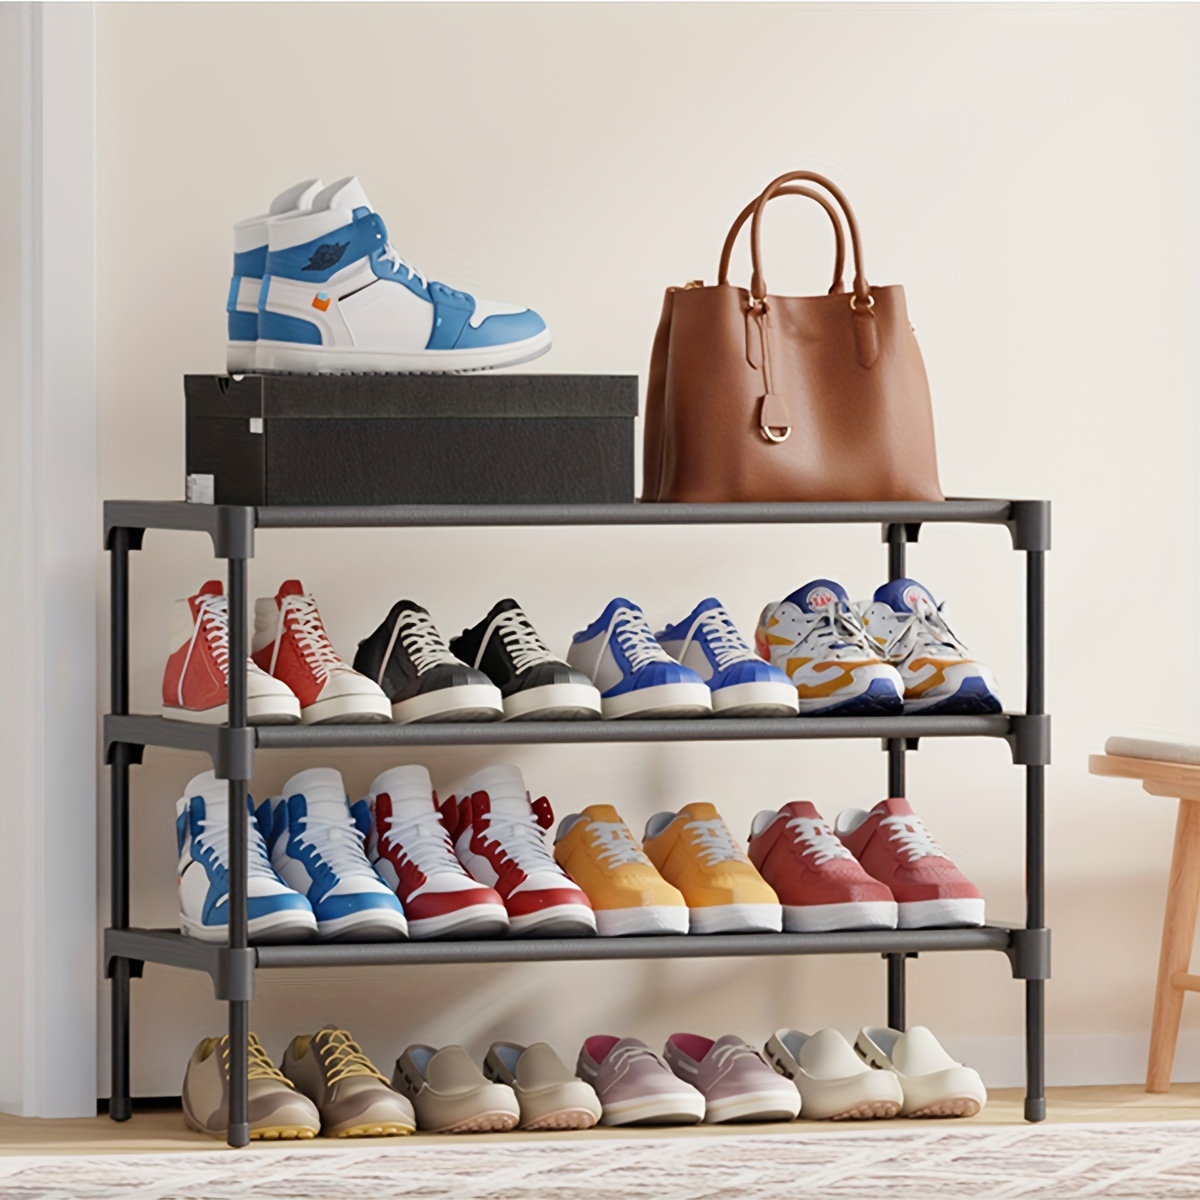 

3-tier Shoe Organizer For Closet - Modern Shoe Rack Shelf, Ideal For Entryway, Garage, And Corridor, Durable Stackable Shoe Shelves For 12 Pairs